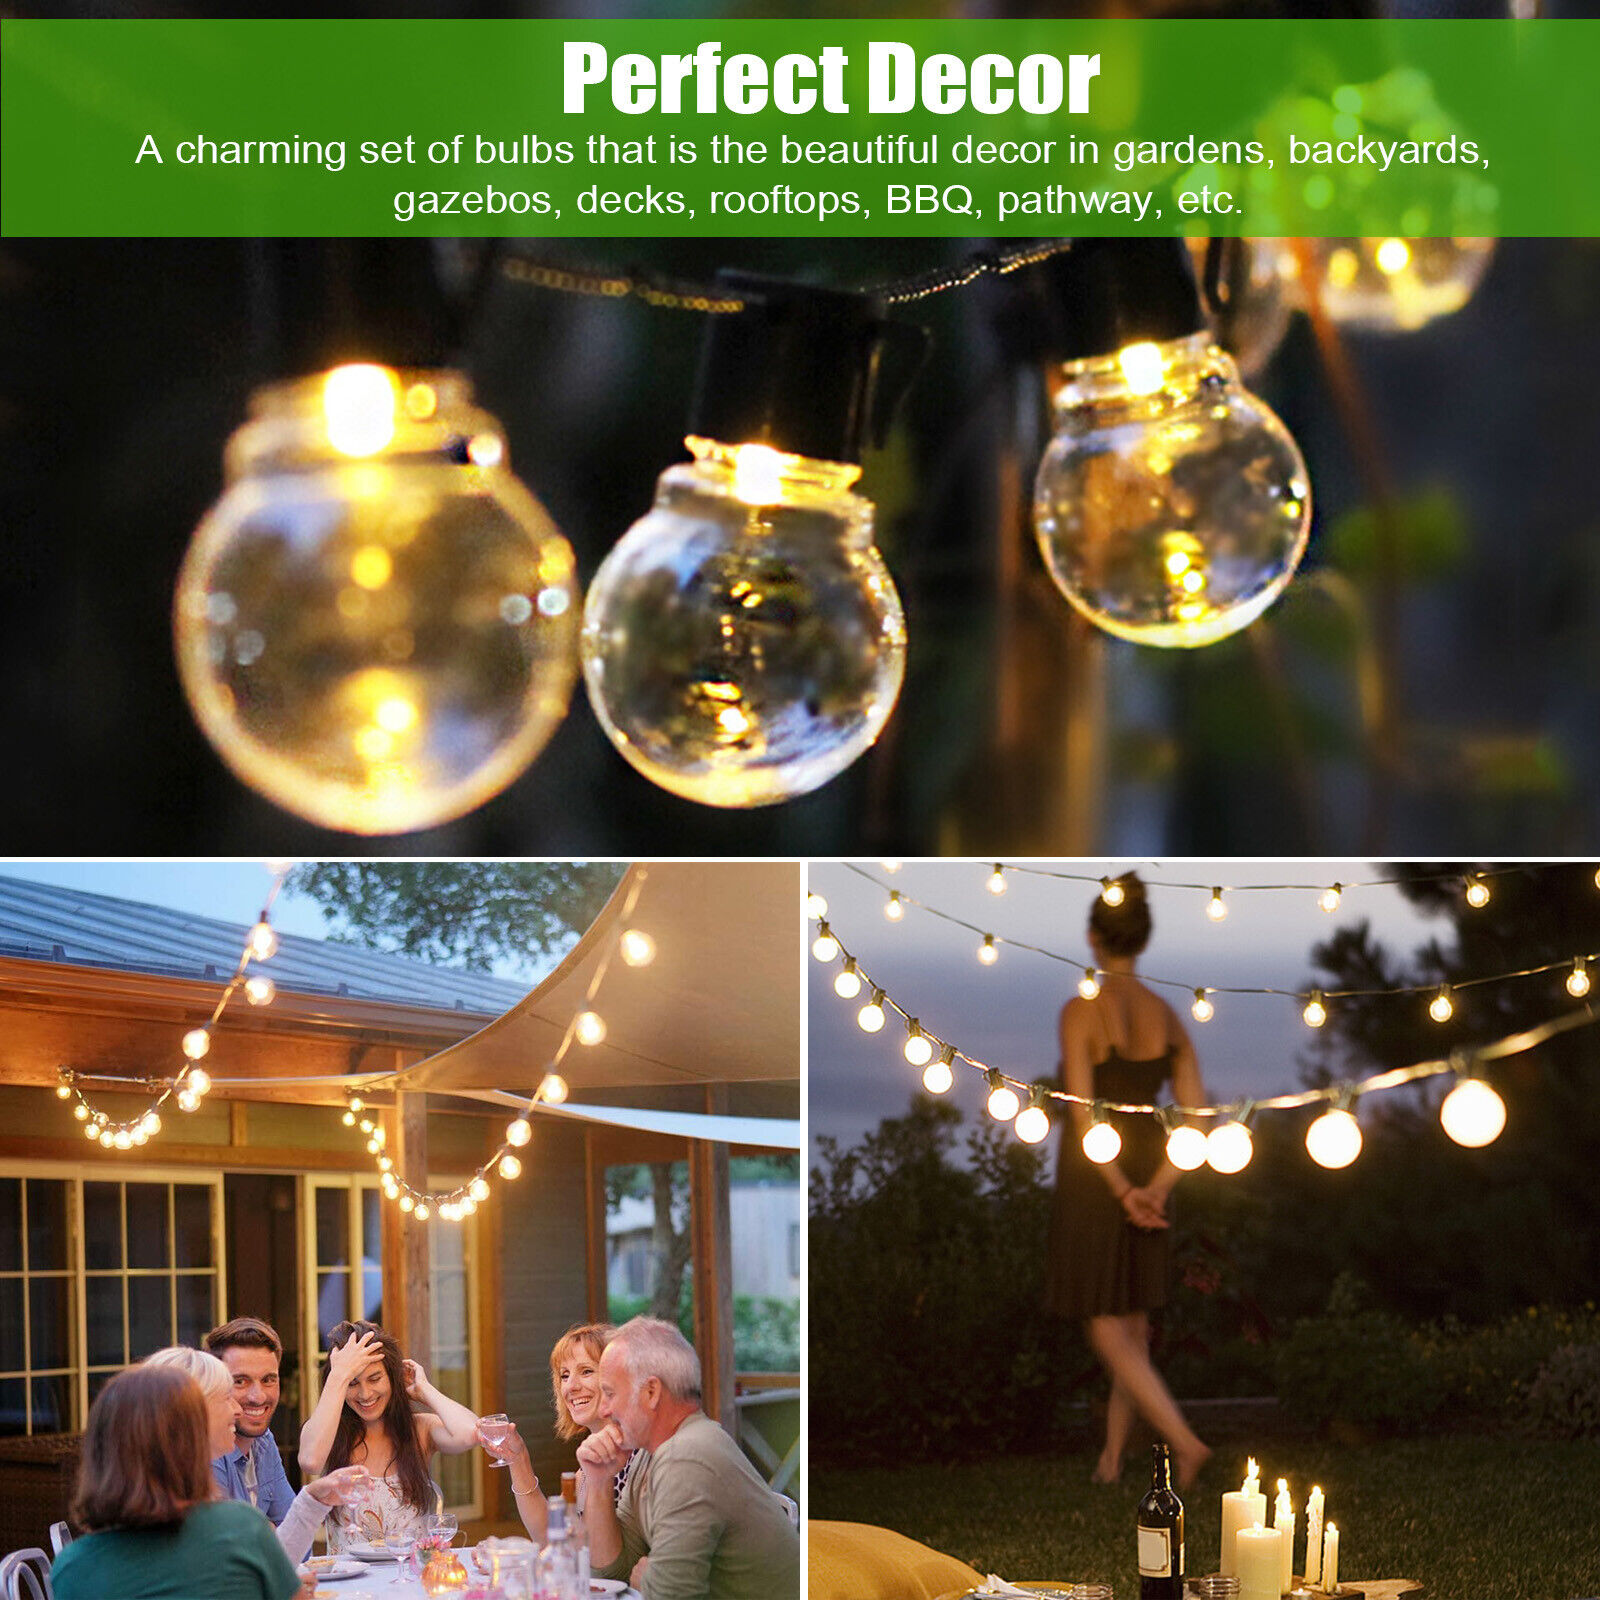 LED-Ceiling-Lights-Solar-Outdoor-Light-String-5M-20LED-Bulb-LED-Transparent-Ball-Night-Light-IP55-Waterproof-Camping-Atmosphere-Tent-Light-Christmas-Day-Decoration-Light-13